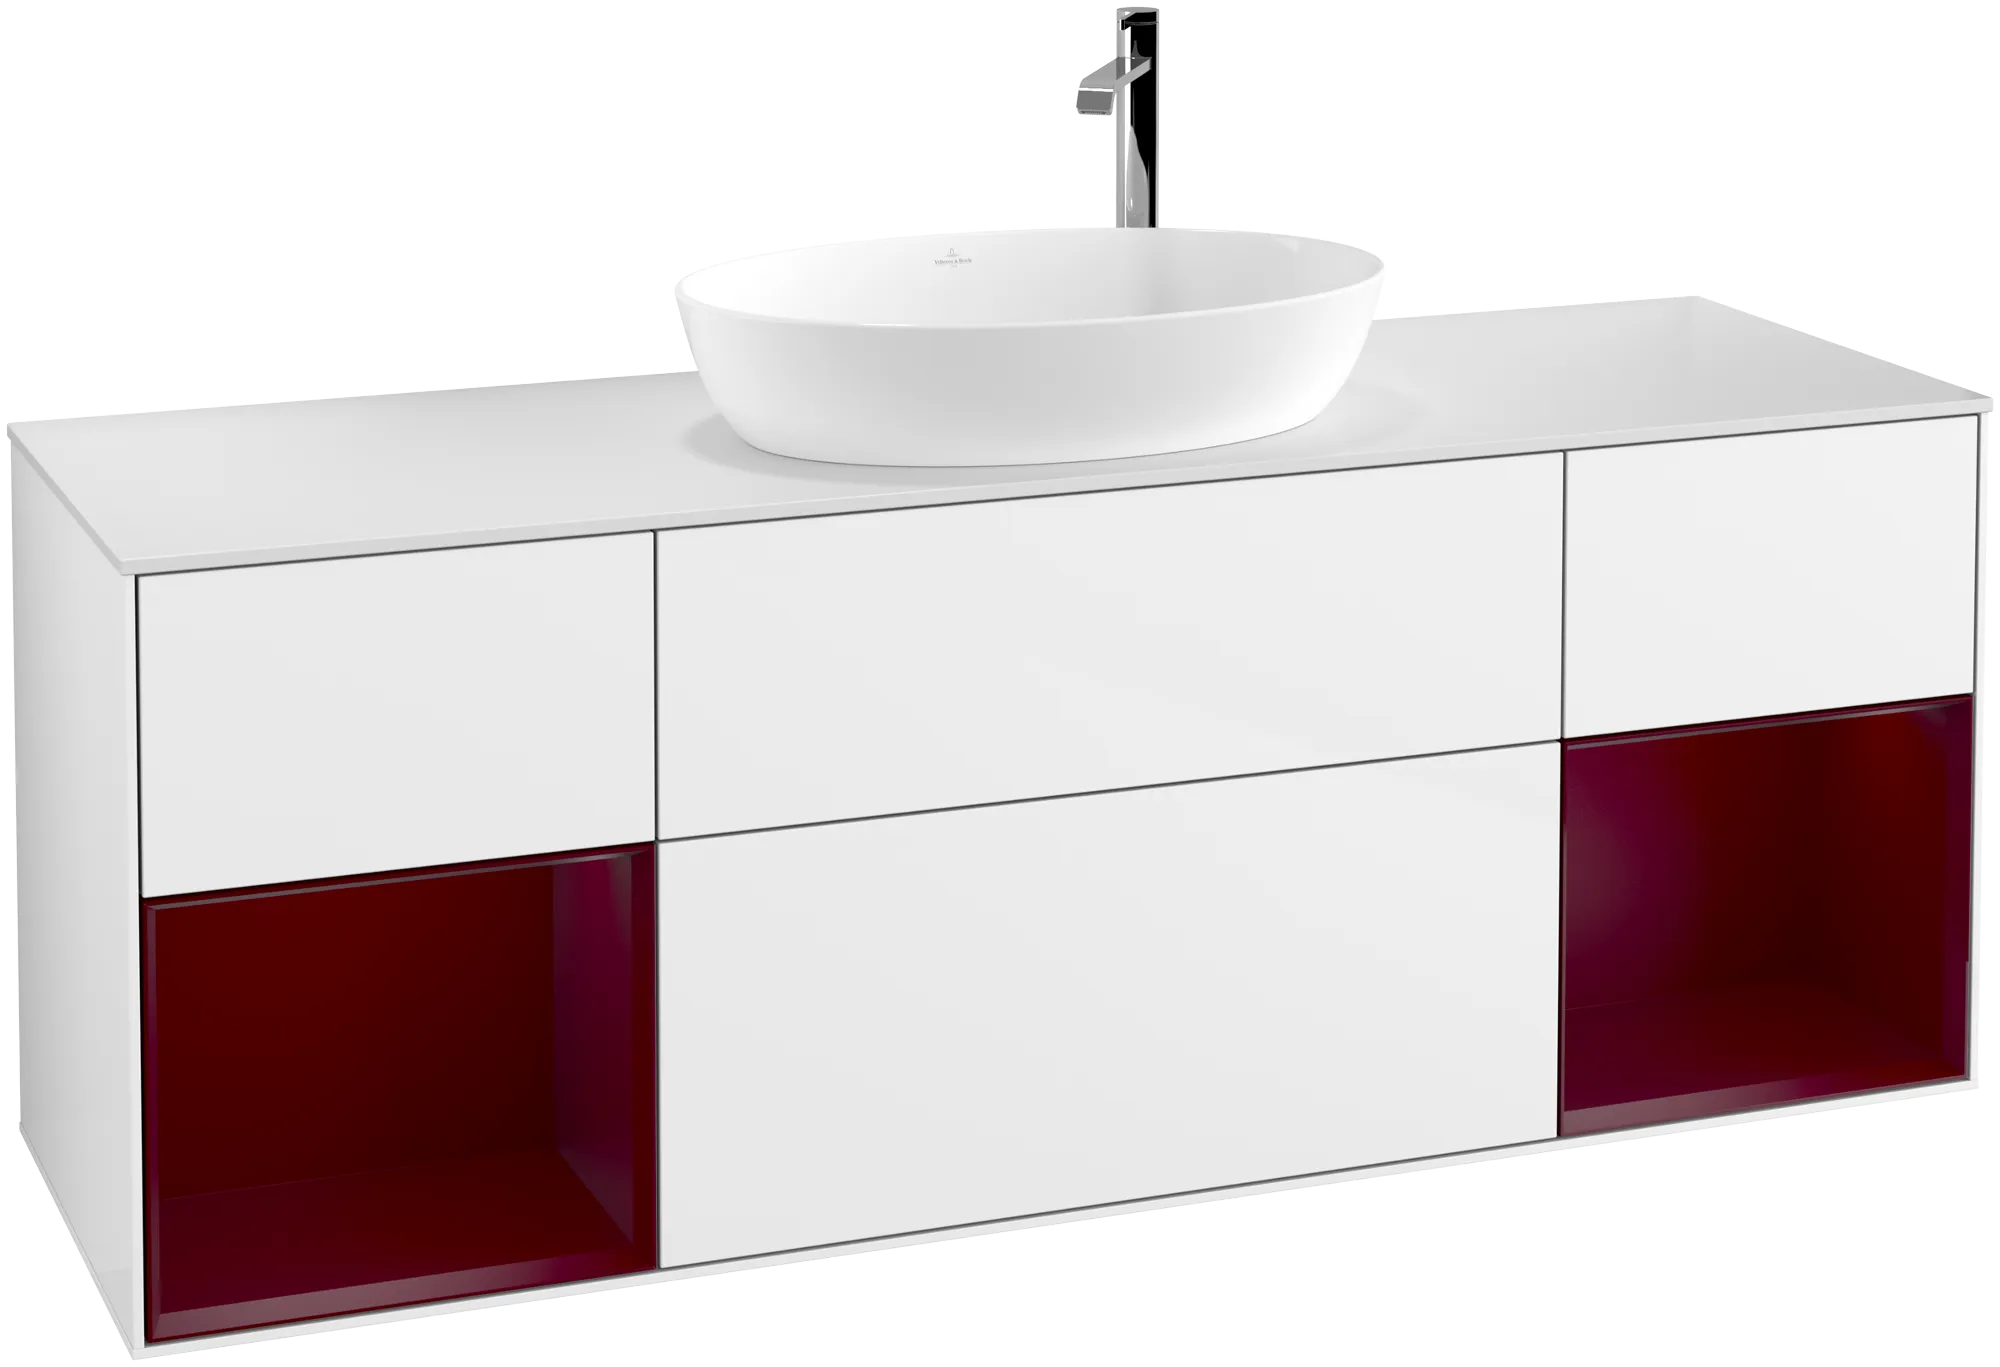 Obrázek VILLEROY BOCH Finion Vanity unit, with lighting, 4 pull-out compartments, 1600 x 603 x 501 mm, Glossy White Lacquer / Peony Matt Lacquer / Glass White Matt #G981HBGF